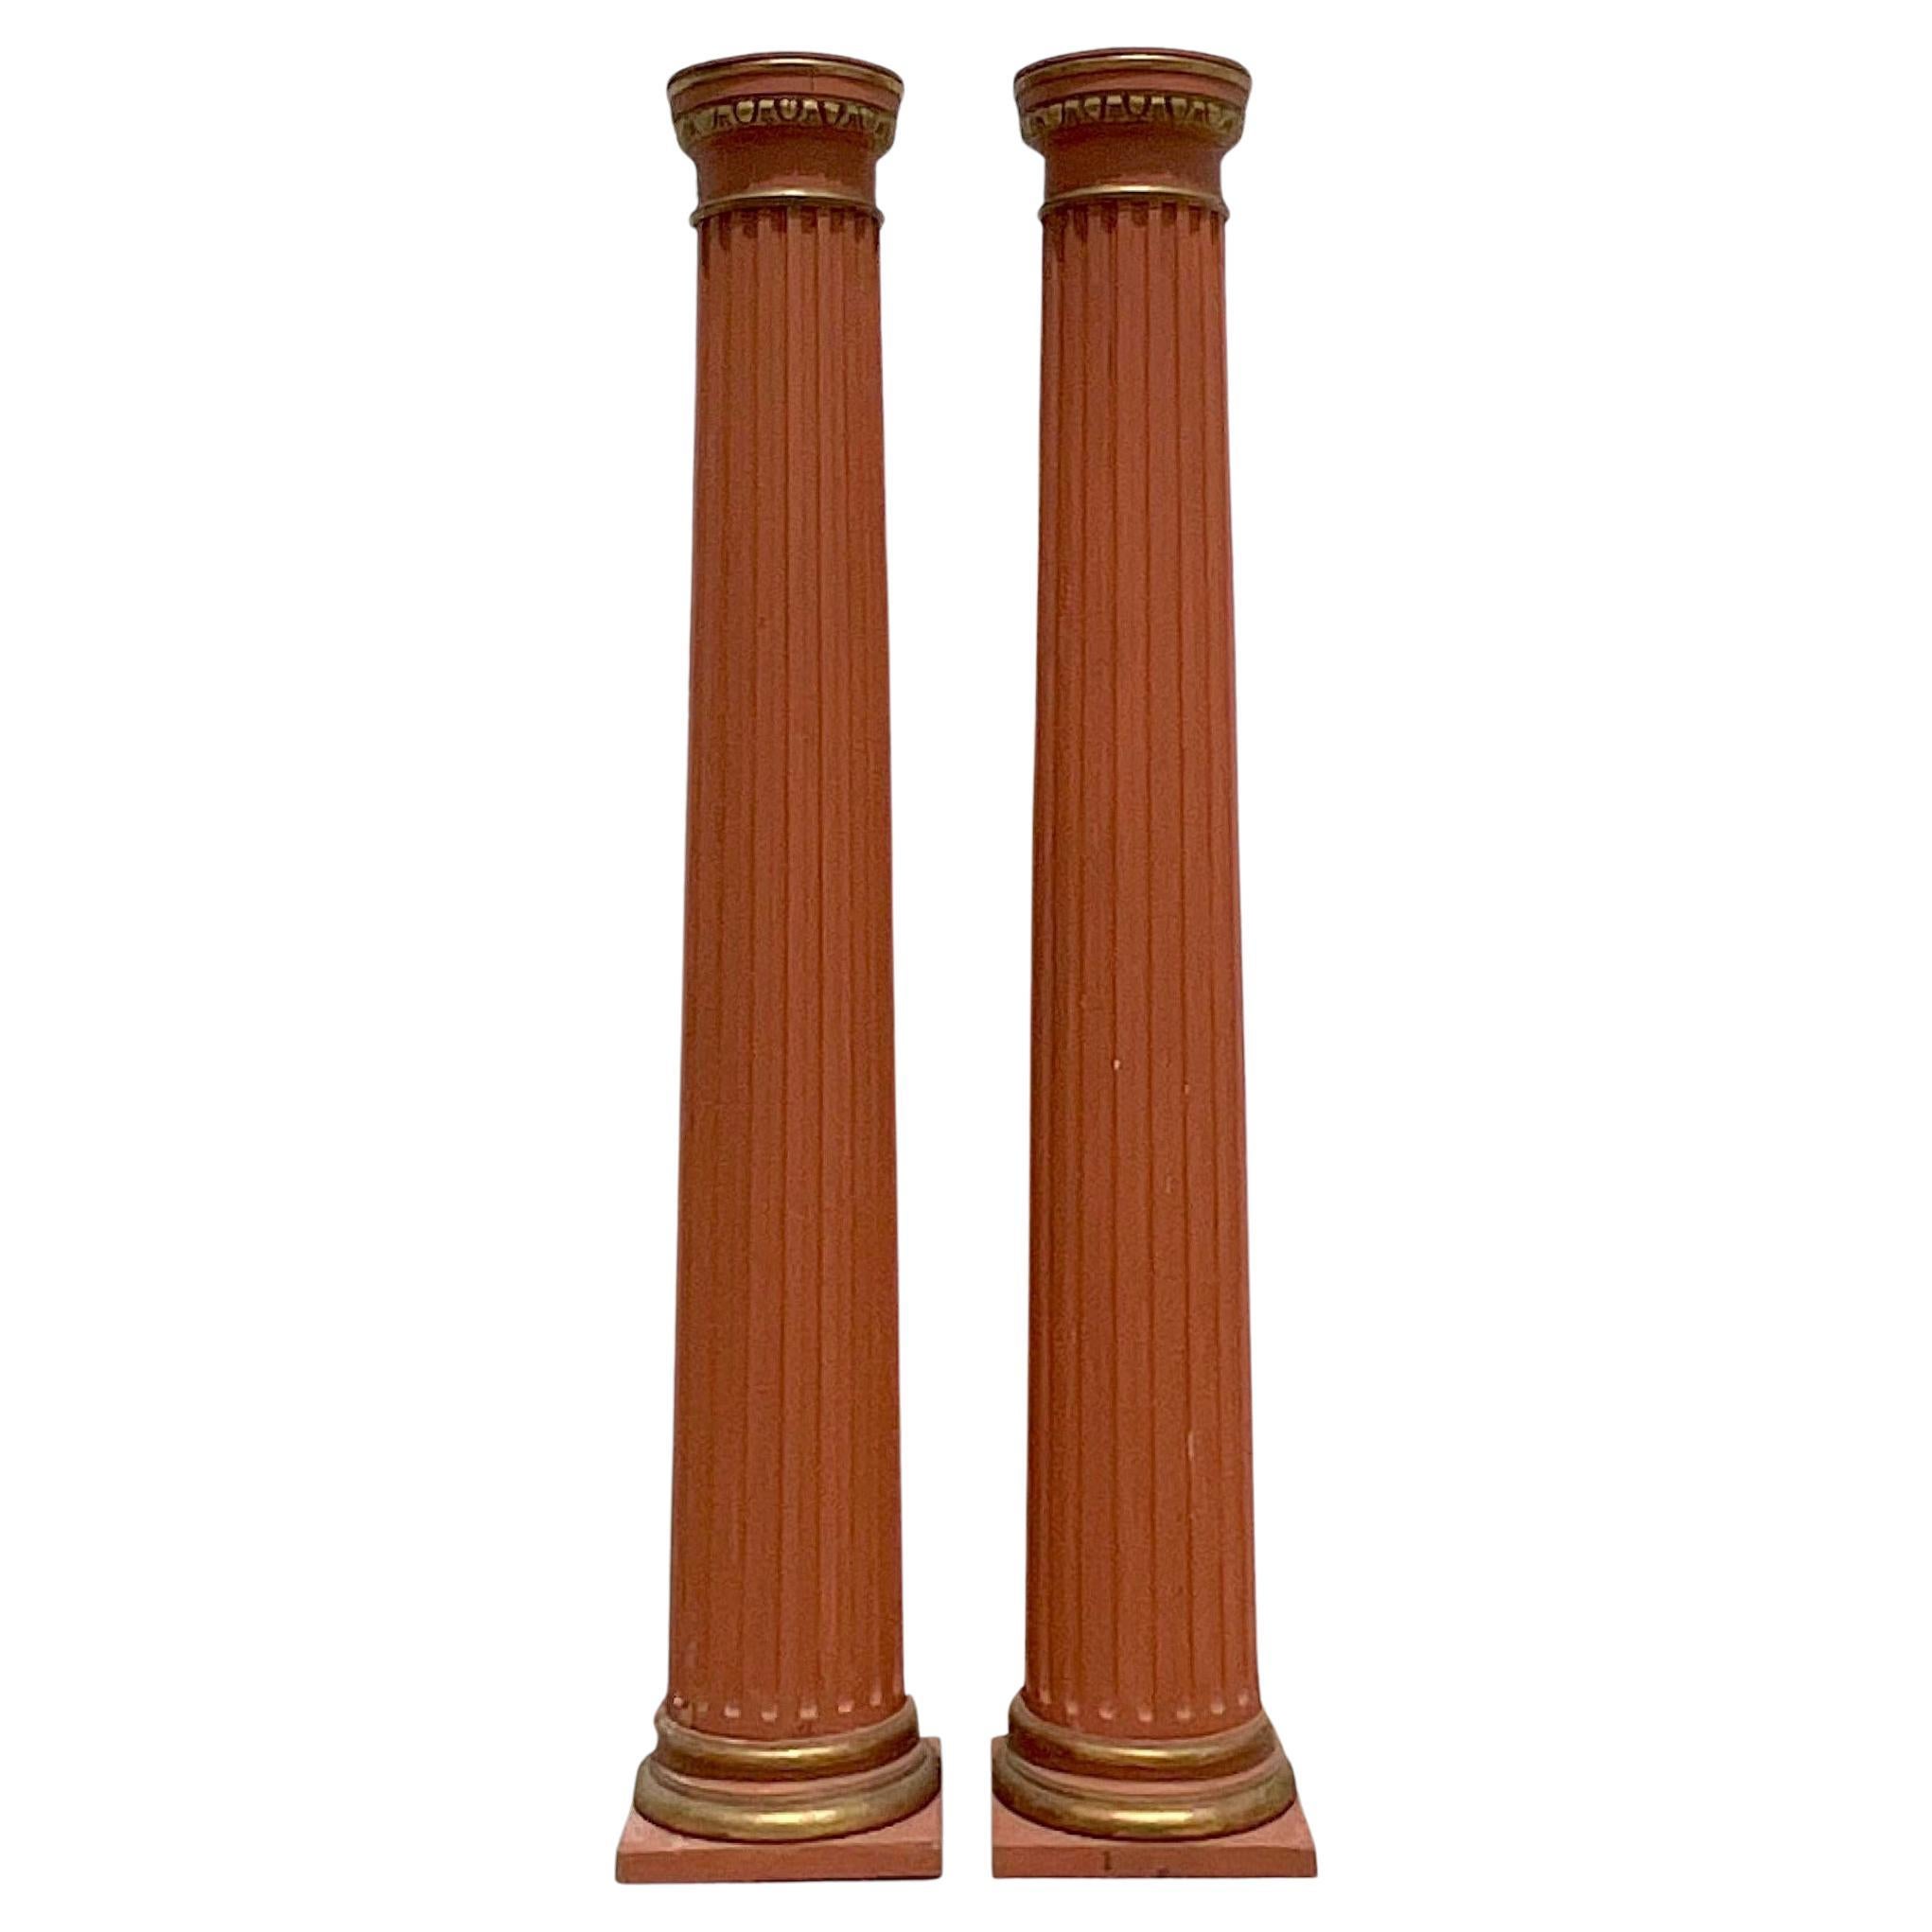 Vintage 18th Century Boho Italian Fluted Columns - a Pair For Sale